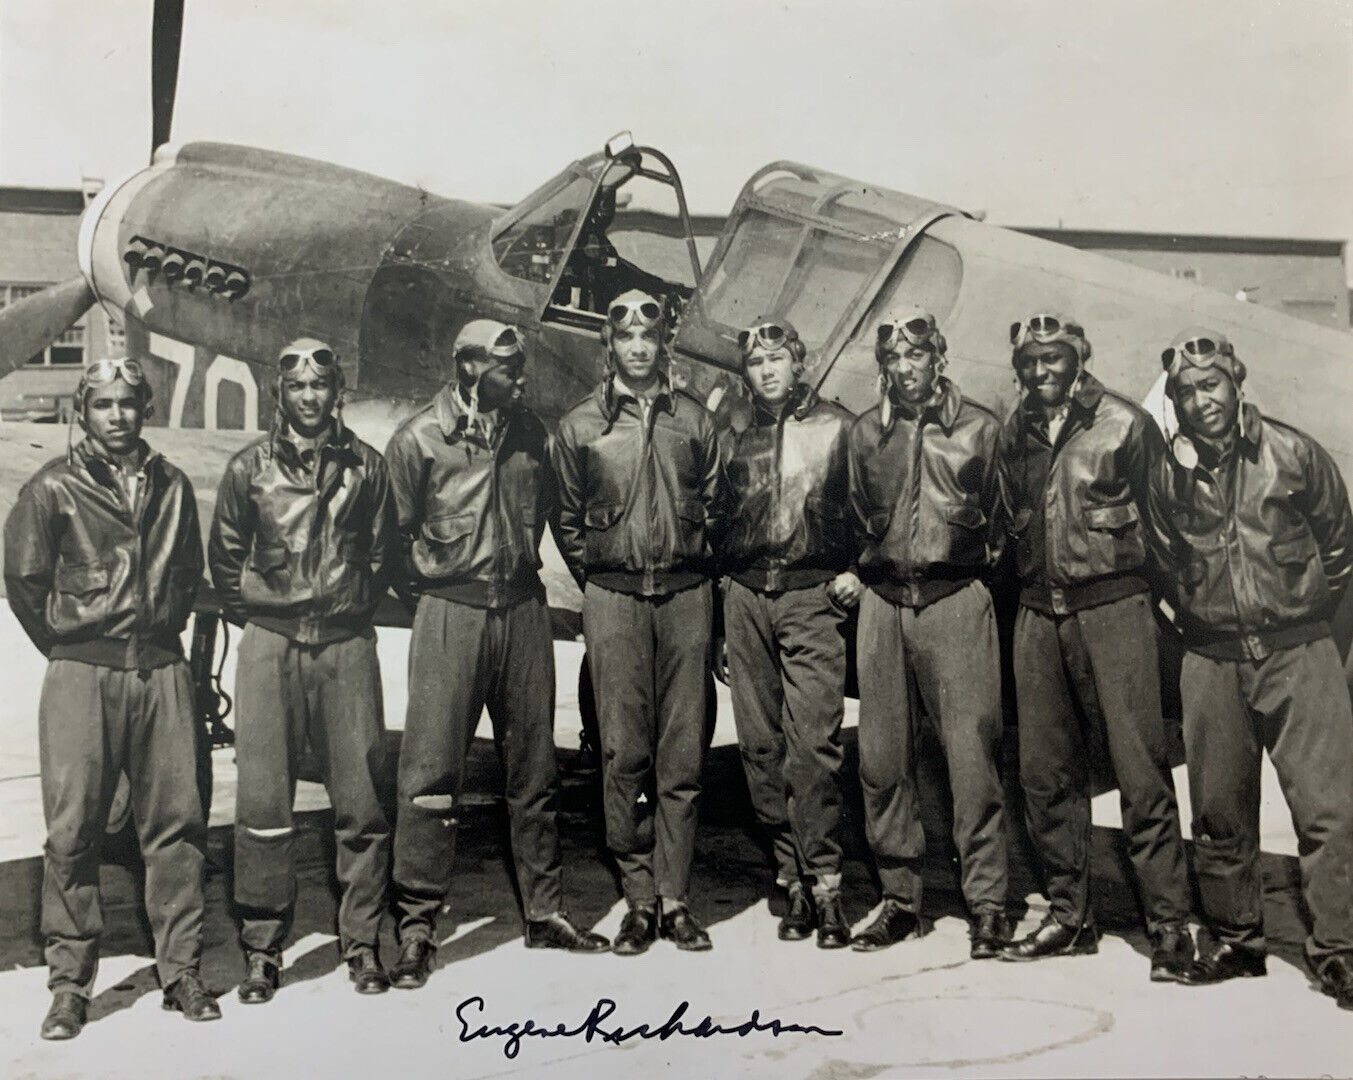 EUGENE RICHARDSON HAND SIGNED 8x10 Photo Poster painting TUSKEGEE AIRMEN AUTOGRAPH AUTHENTIC